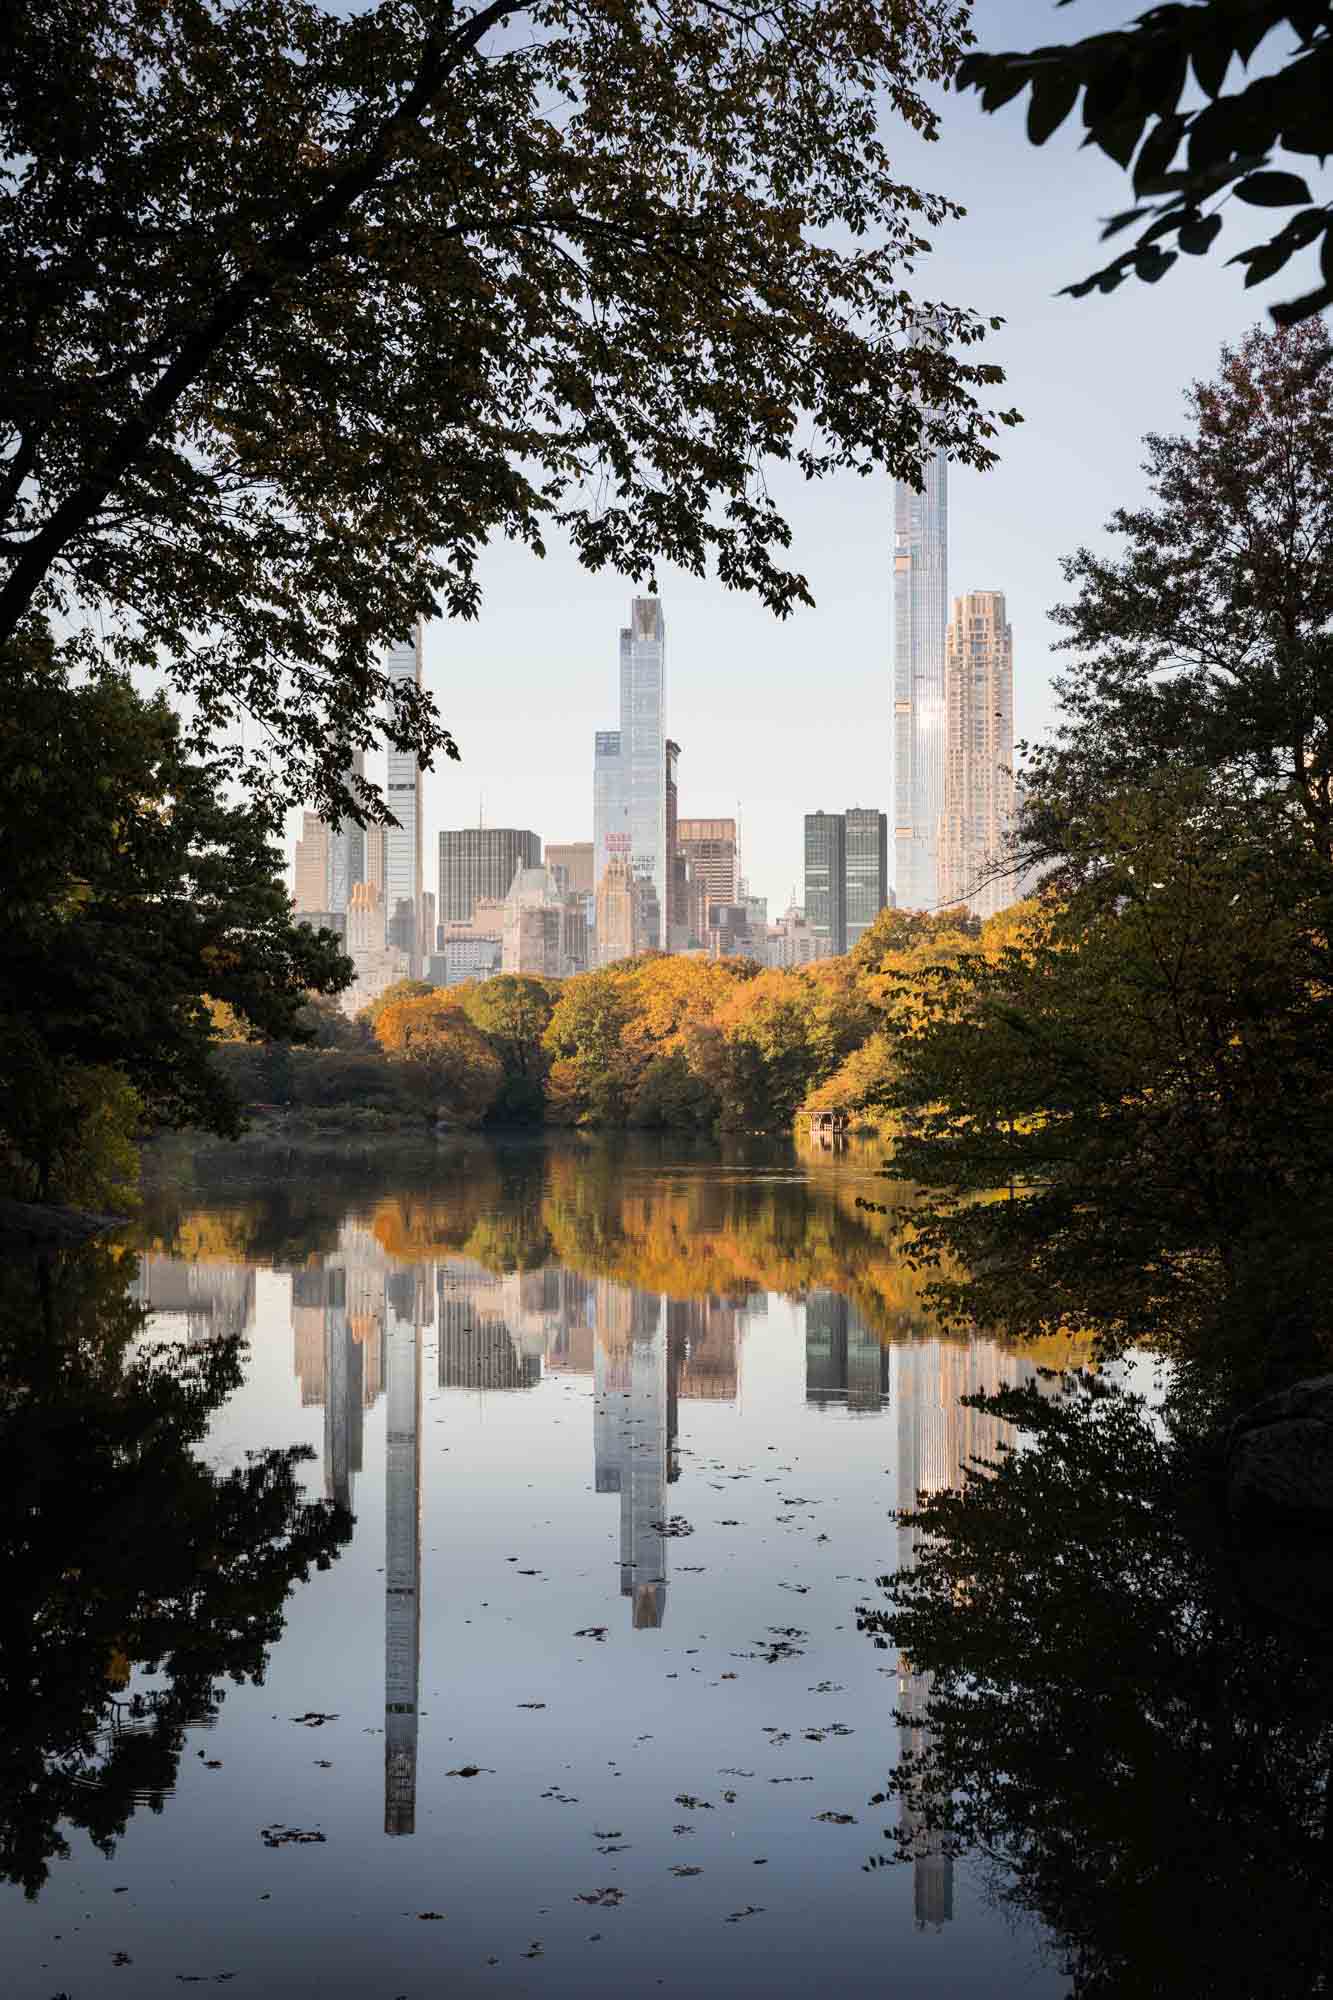 View of NYC skyline through trees over lake in Central Park